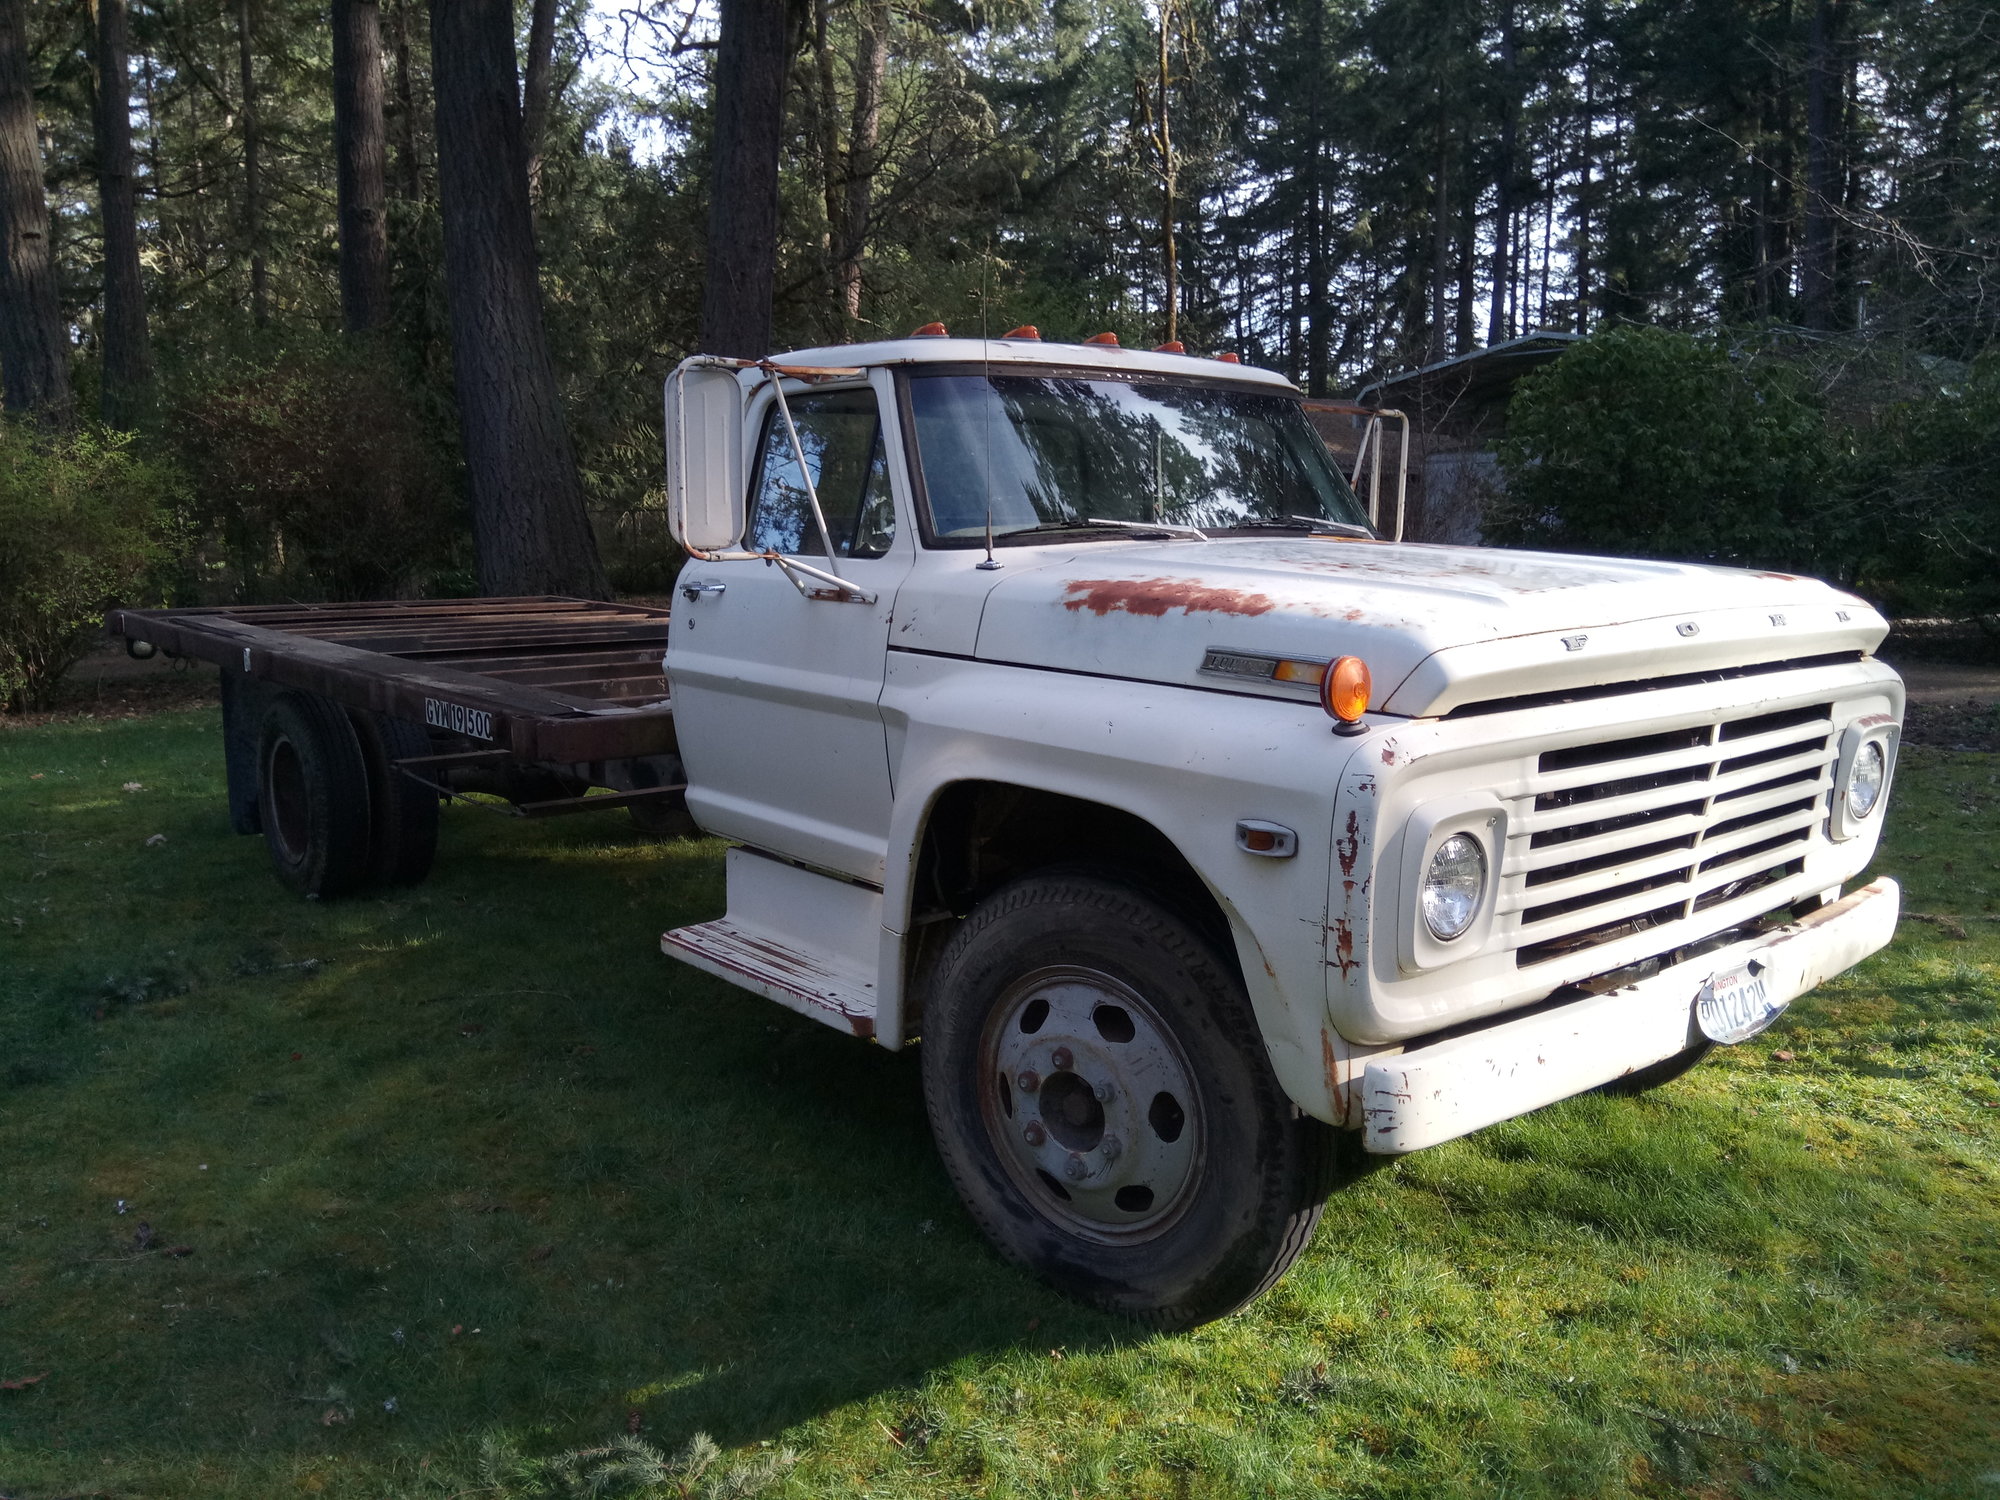 67 To 72 F600 Identification Ford Truck Enthusiasts Forums